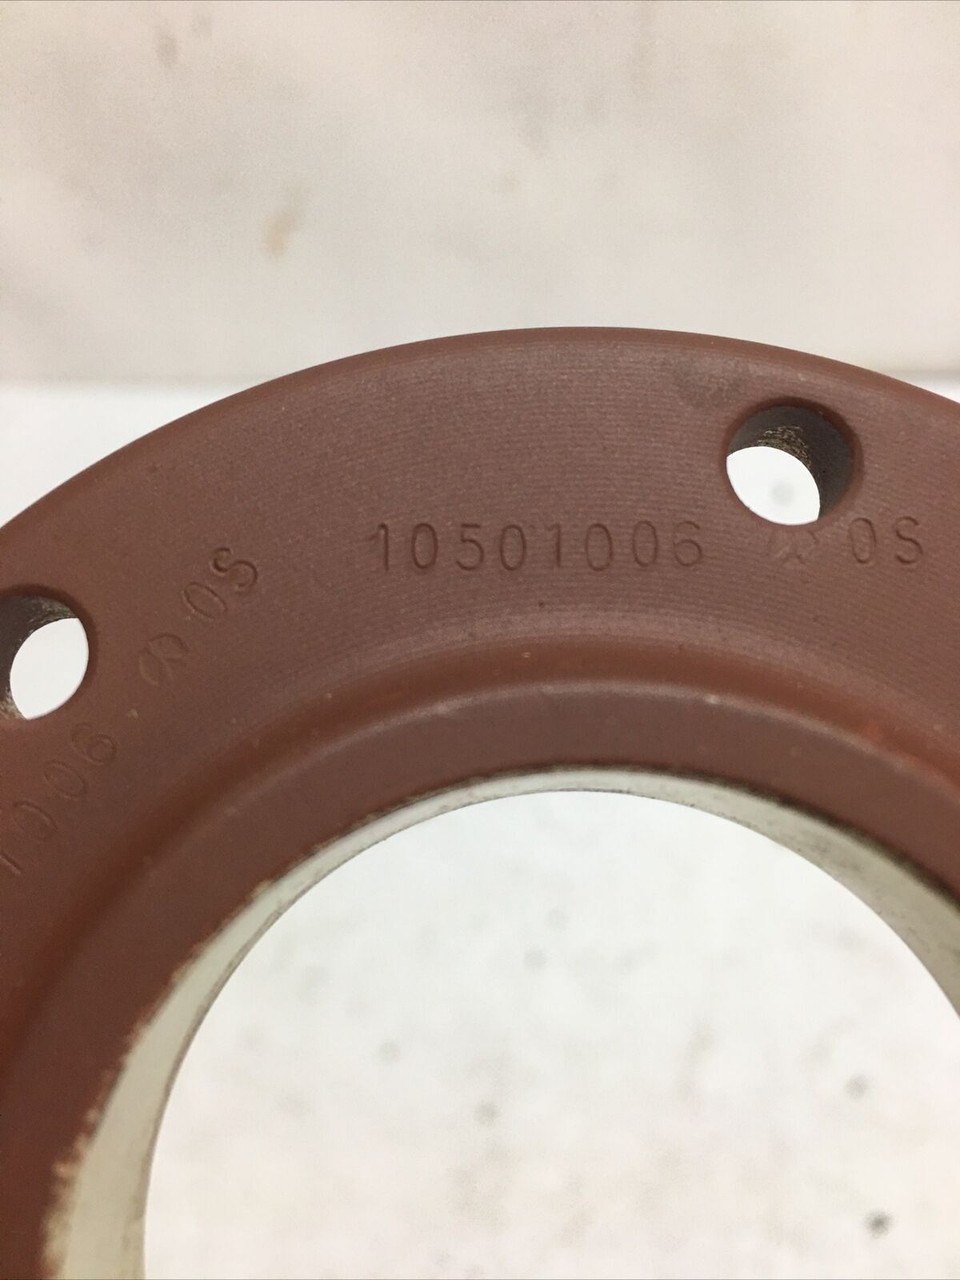 Housing Seal 10501006 General Dynamics Land Systems